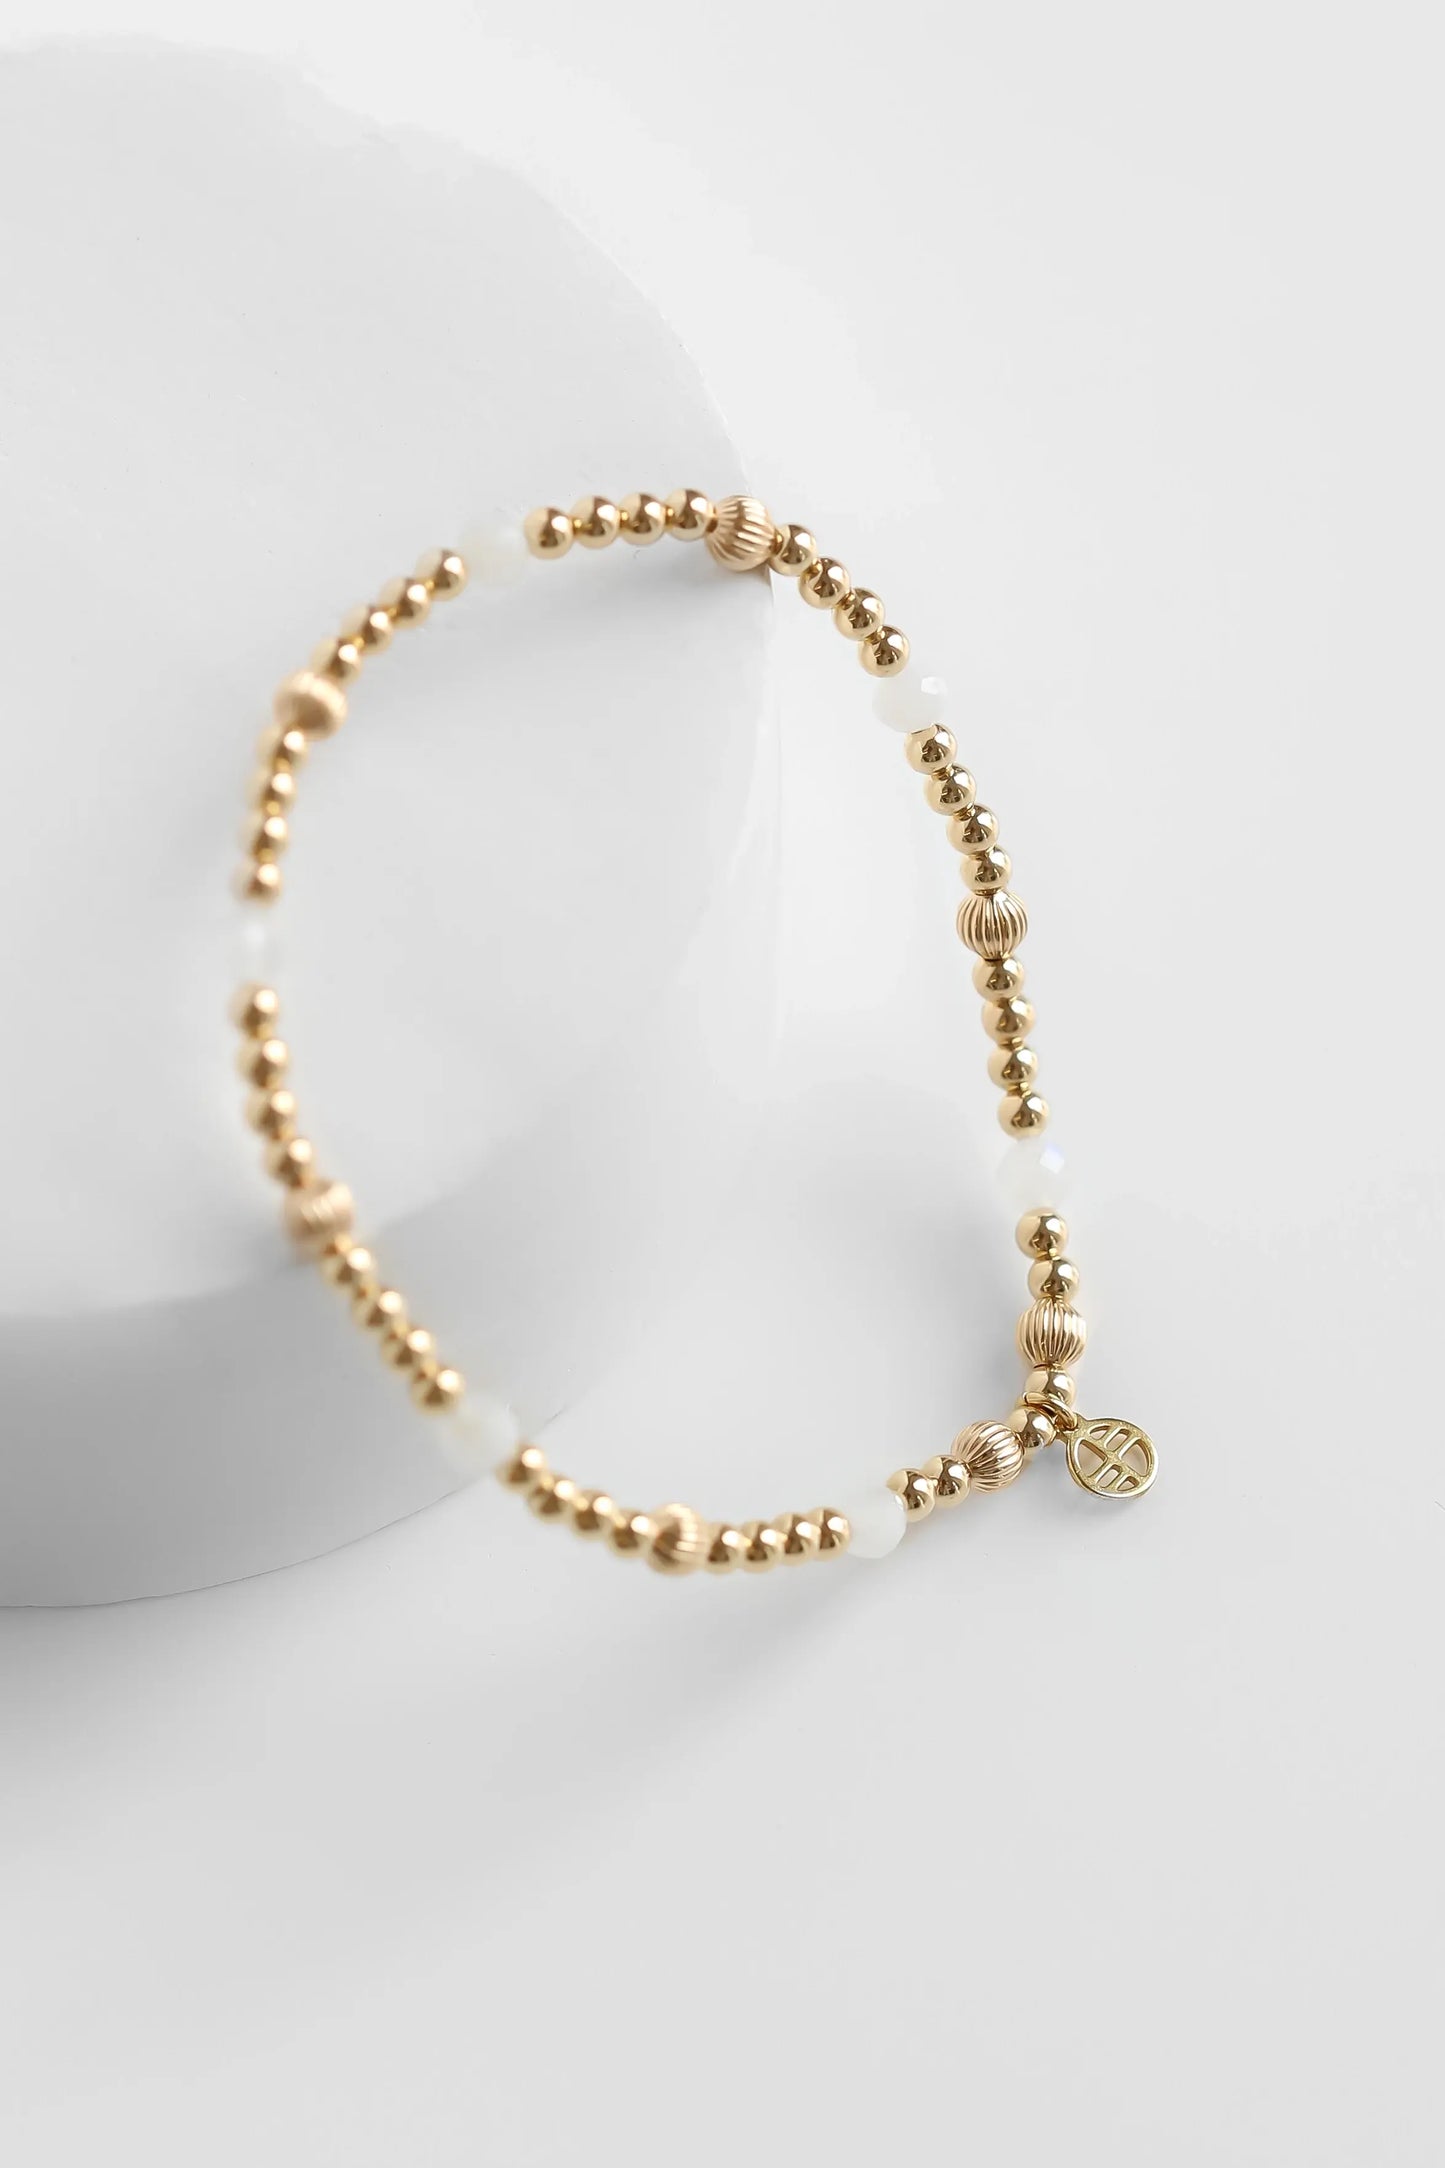 The    Woodstock Bracelet Moonstone by  Francesca Jewellery from the Bracelets Collection.